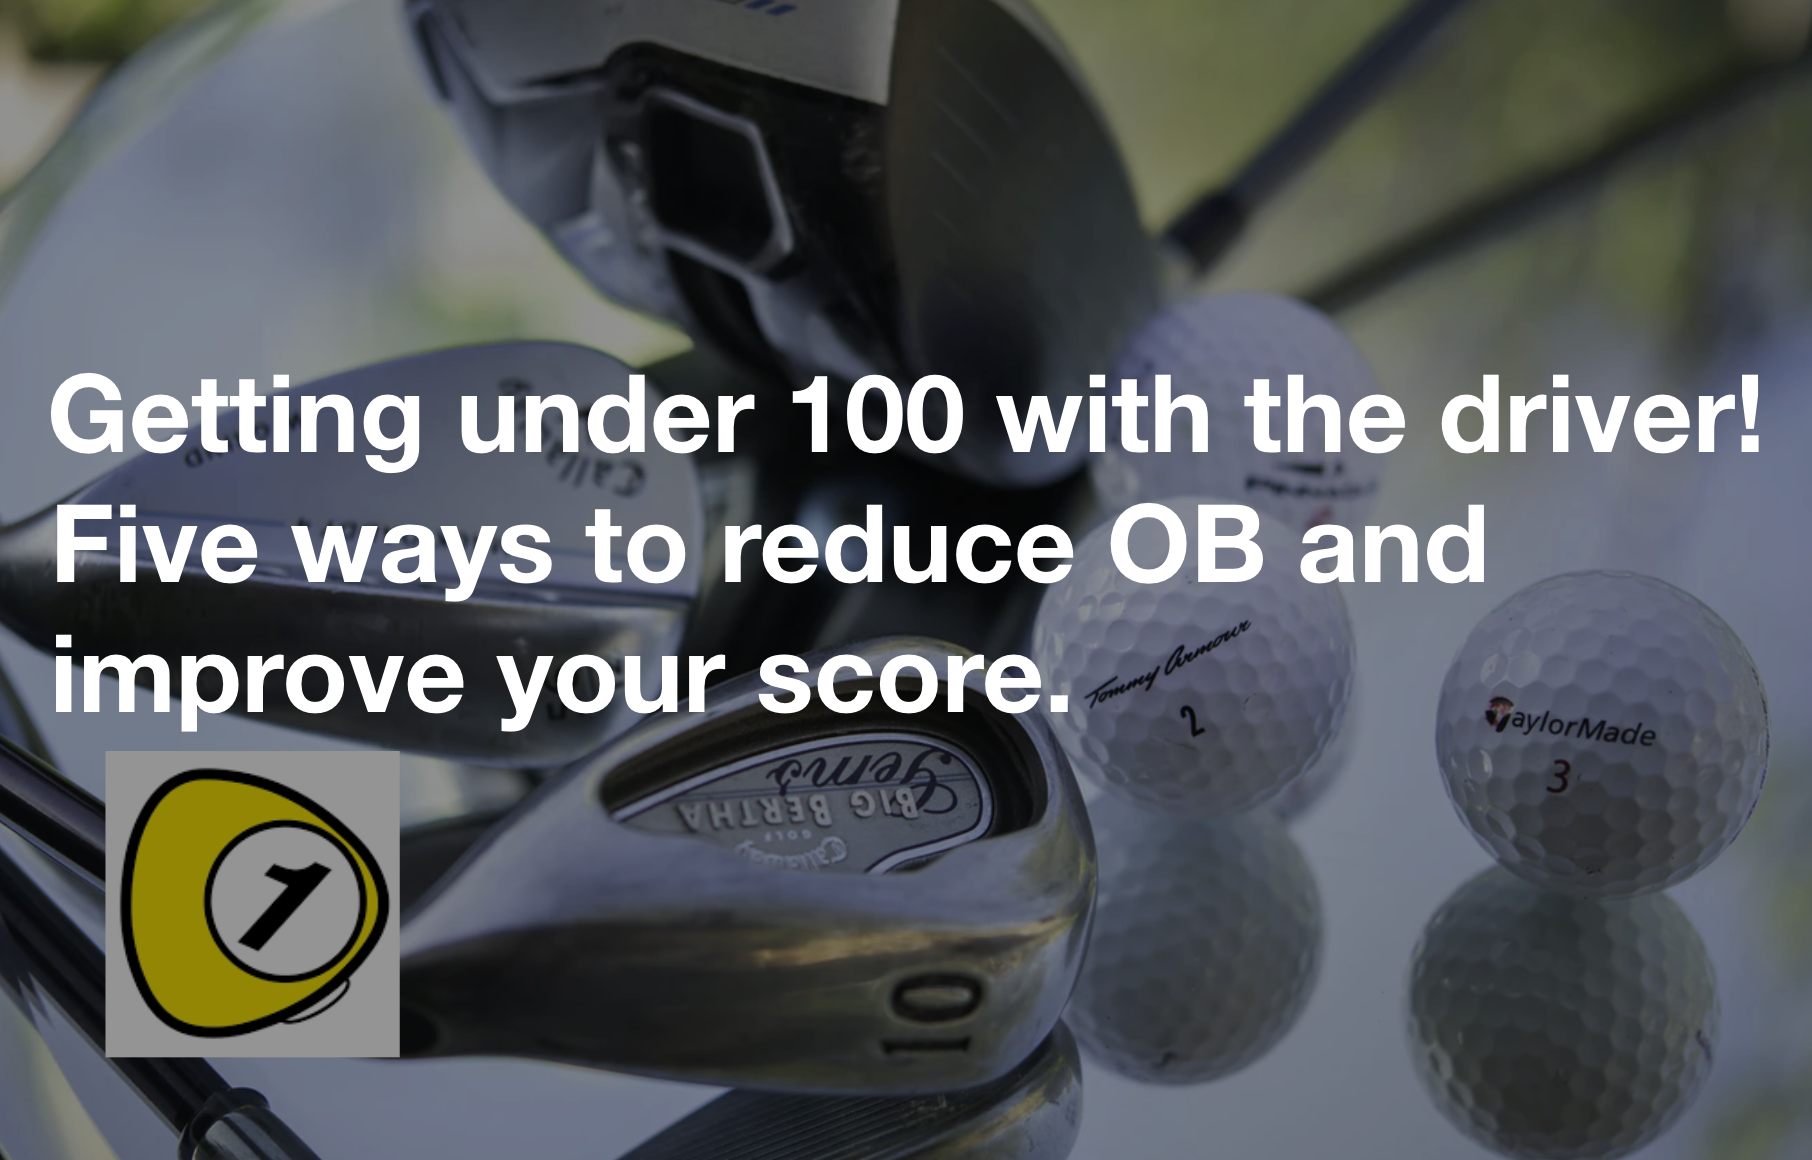 golfScoreCounterDotcom_Getting under 100 with the driver! Five ways to reduce OB and improve your score.